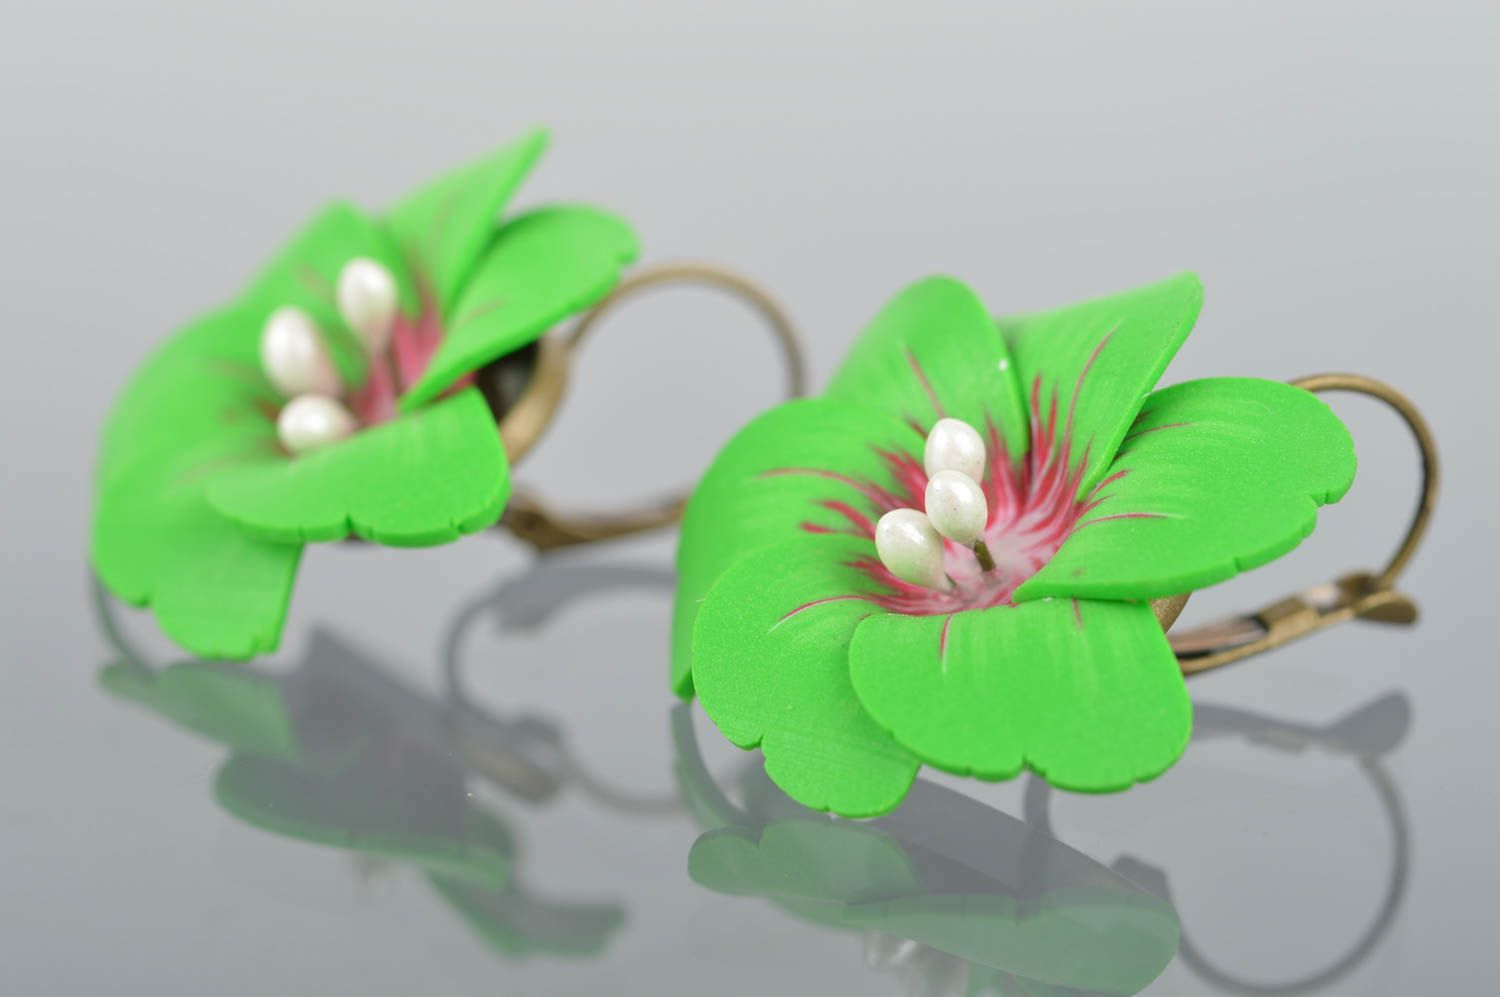 Exclusive green flower earrings made of polymer clay for summer look photo 2